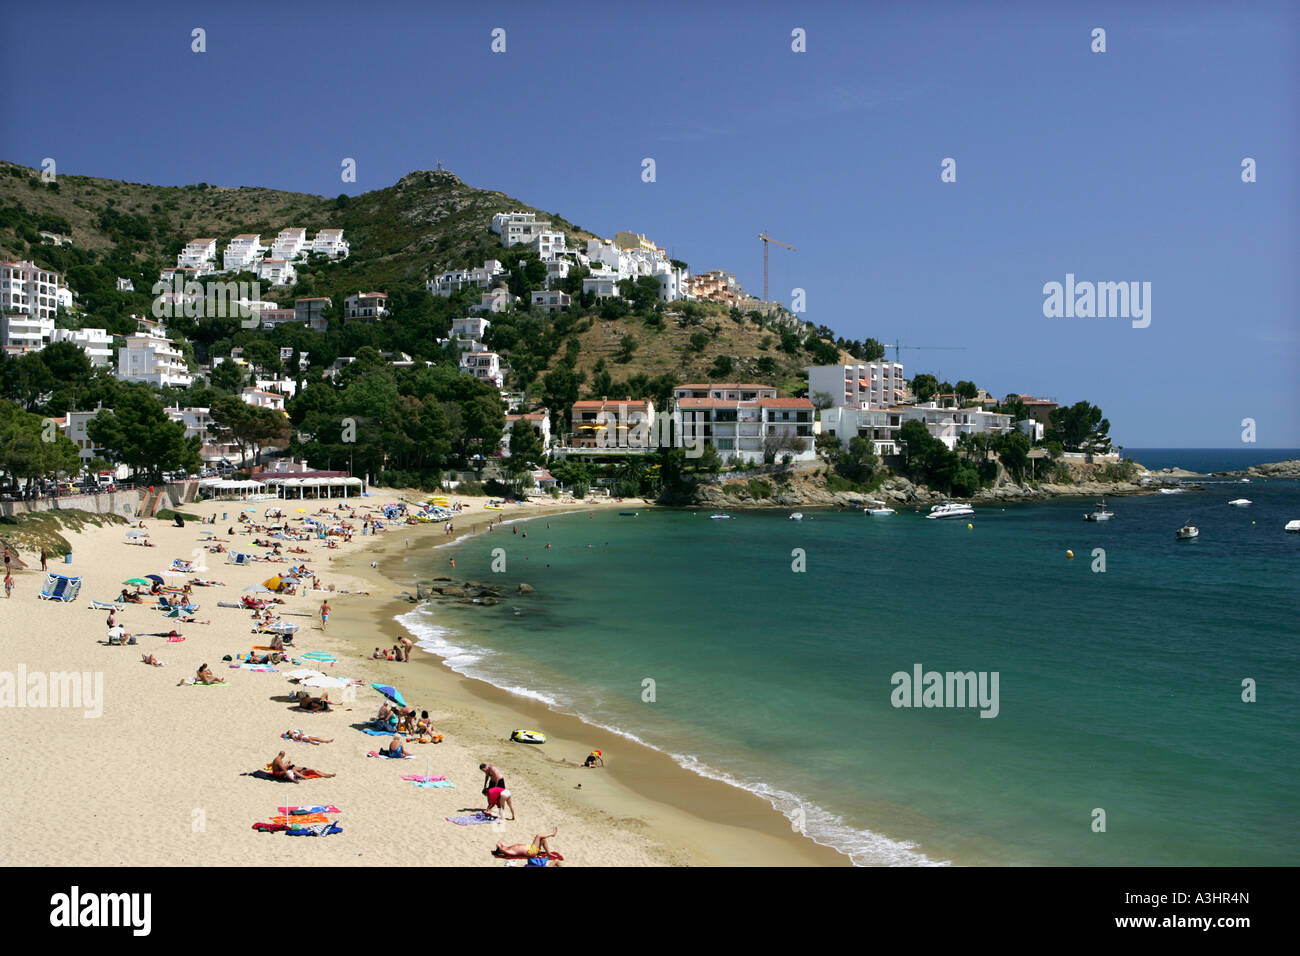 The beach at Canyelles Petites, Roses, Spain Stock Photo - Alamy